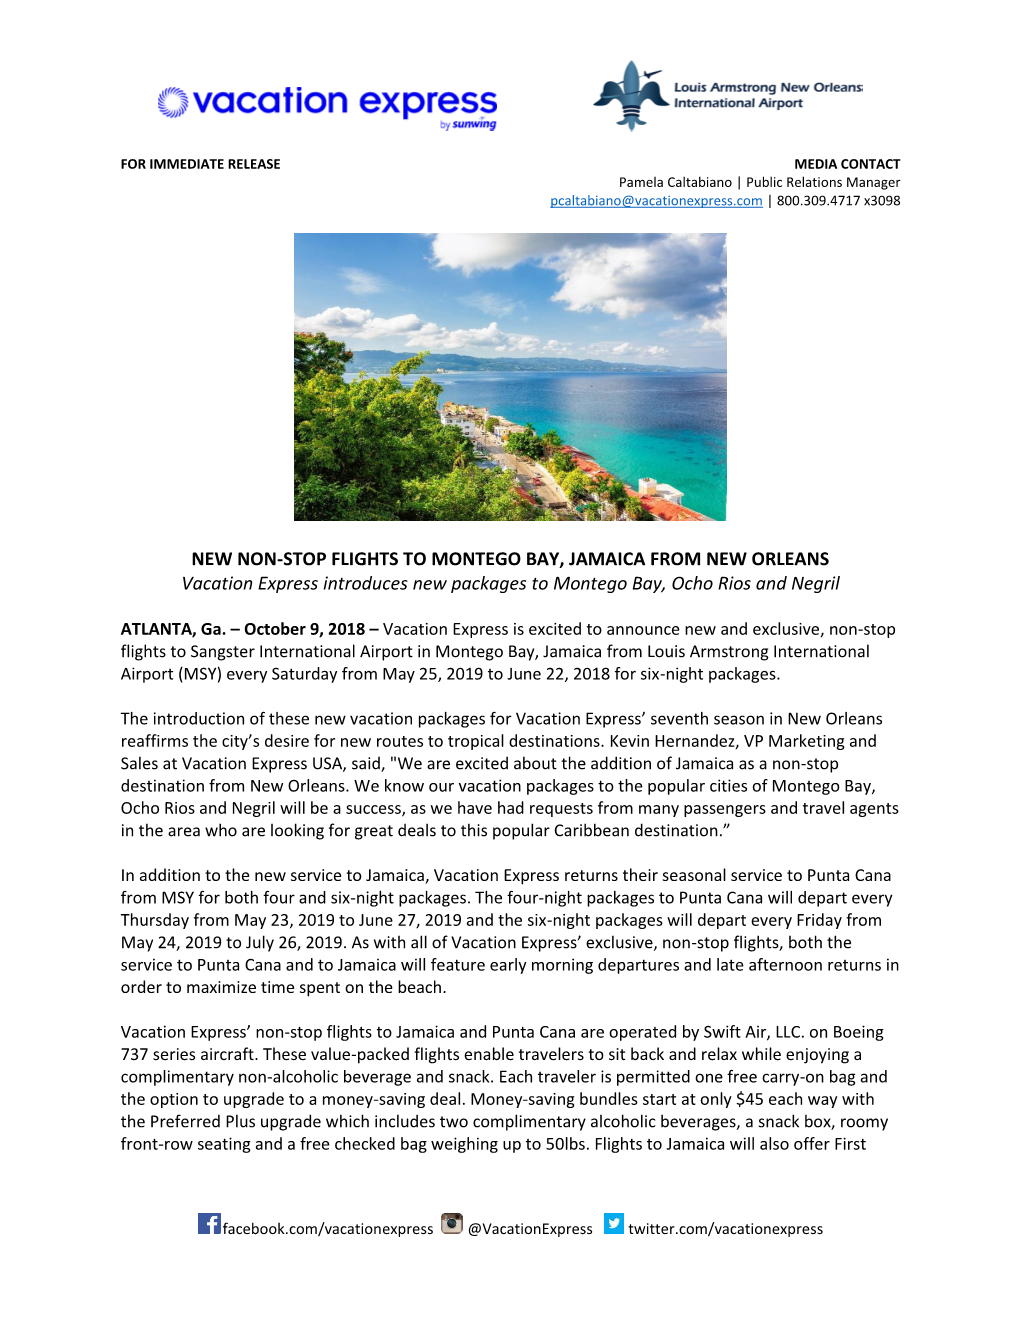 NEW NON-STOP FLIGHTS to MONTEGO BAY, JAMAICA from NEW ORLEANS Vacation Express Introduces New Packages to Montego Bay, Ocho Rios and Negril